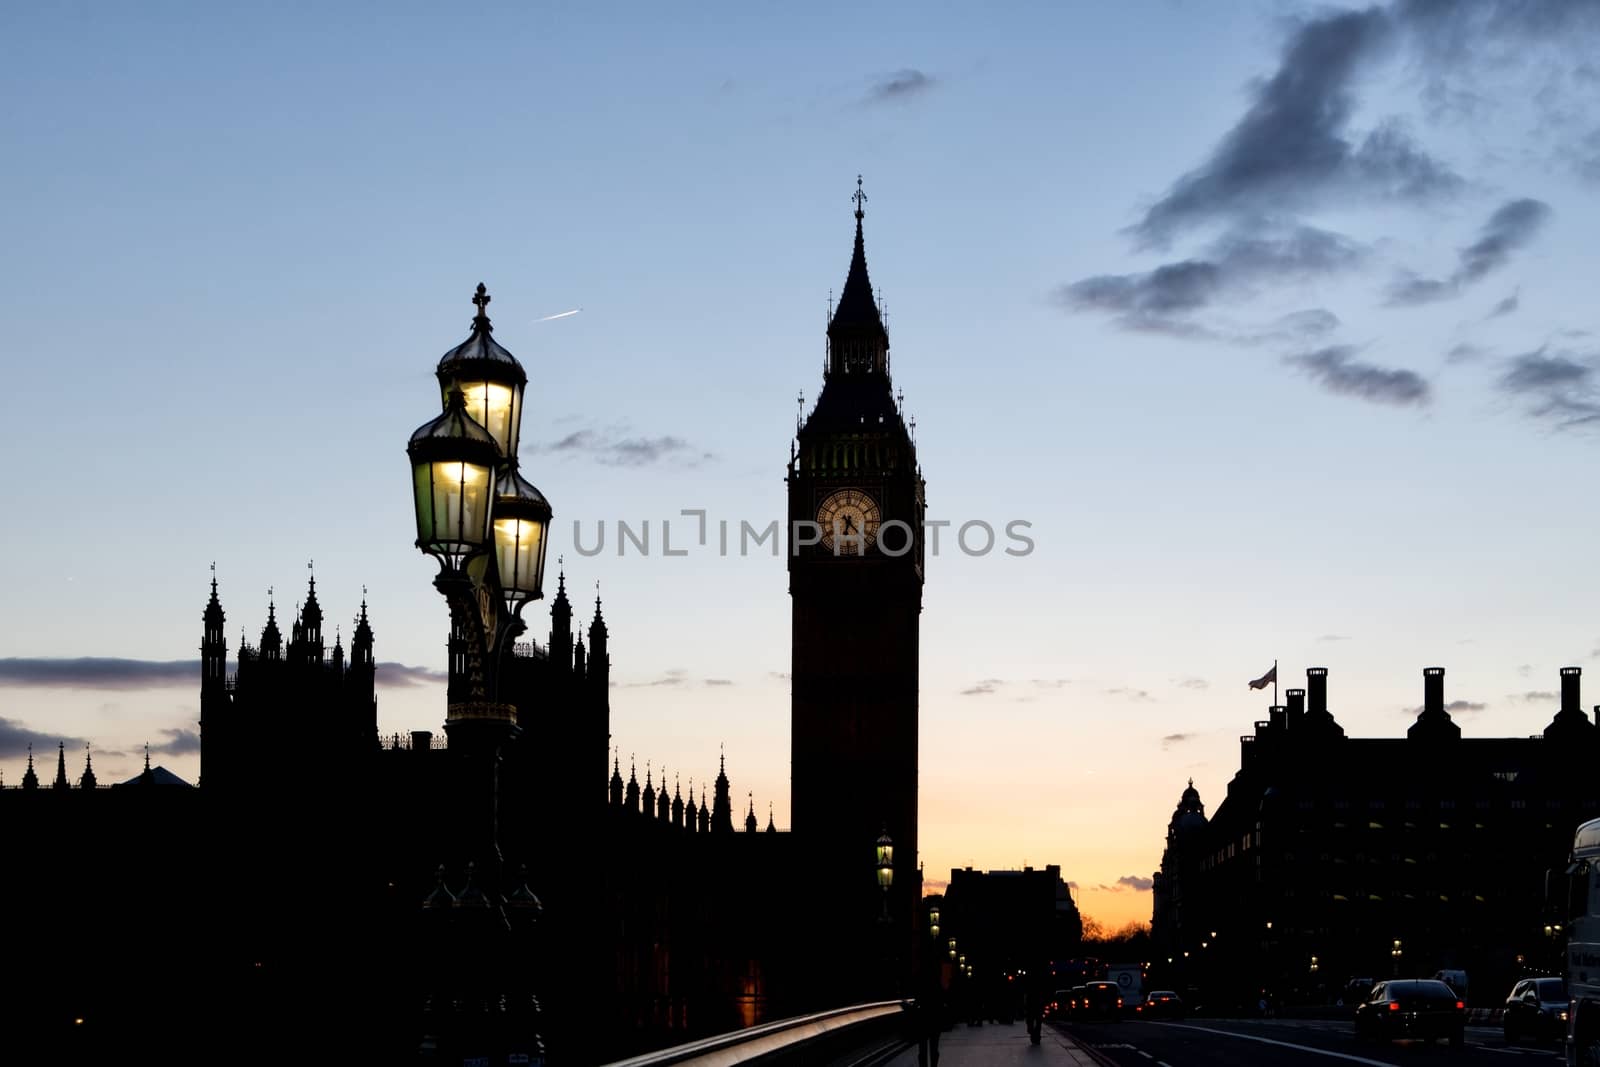 The Clock Tower, named in tribute to Queen Elizabeth II in her Diamond Jubilee, also known as Big Ben.